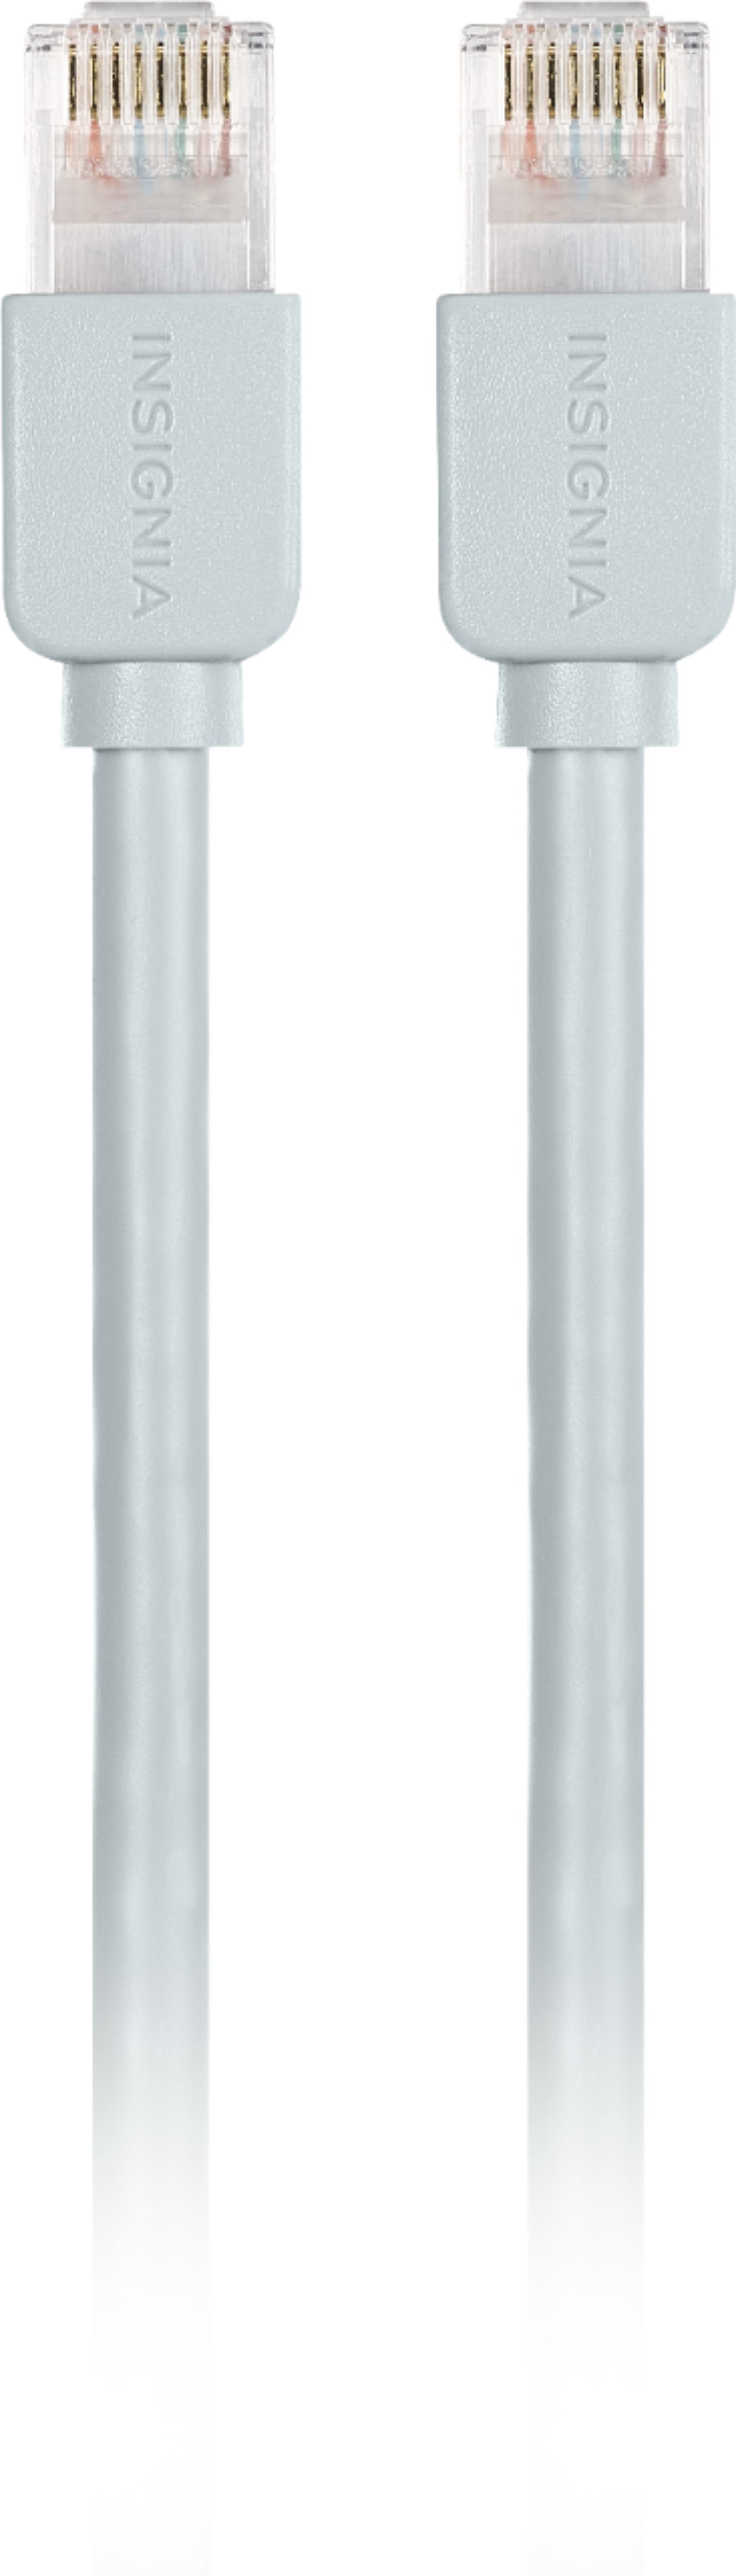 Angle View: Insignia™ - 14 foot Cat-6 Ethernet Cable - Gray